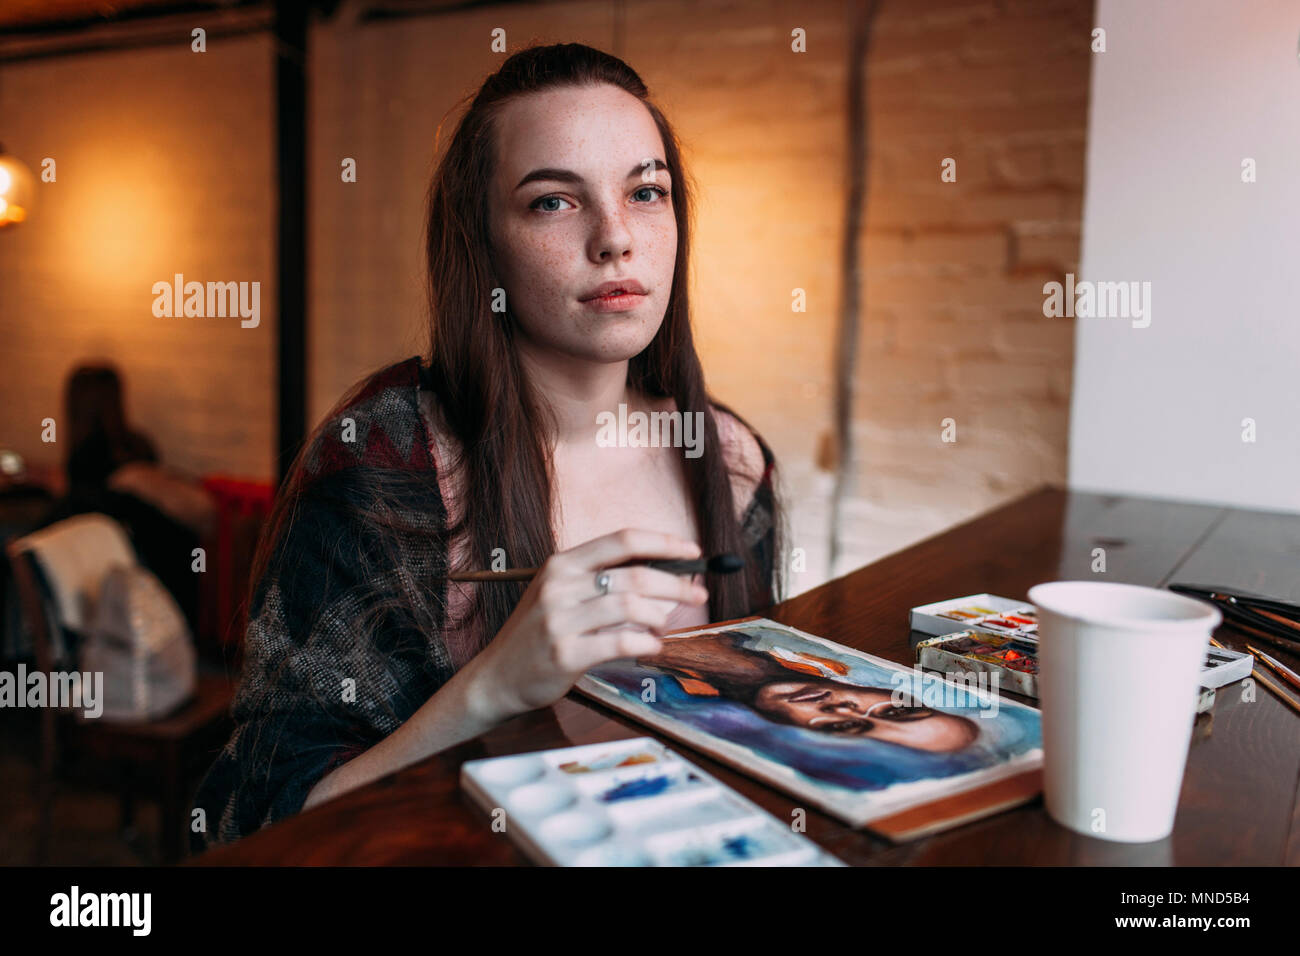 Portrait of beautiful young woman sitting by painting on table at cafe Stock Photo